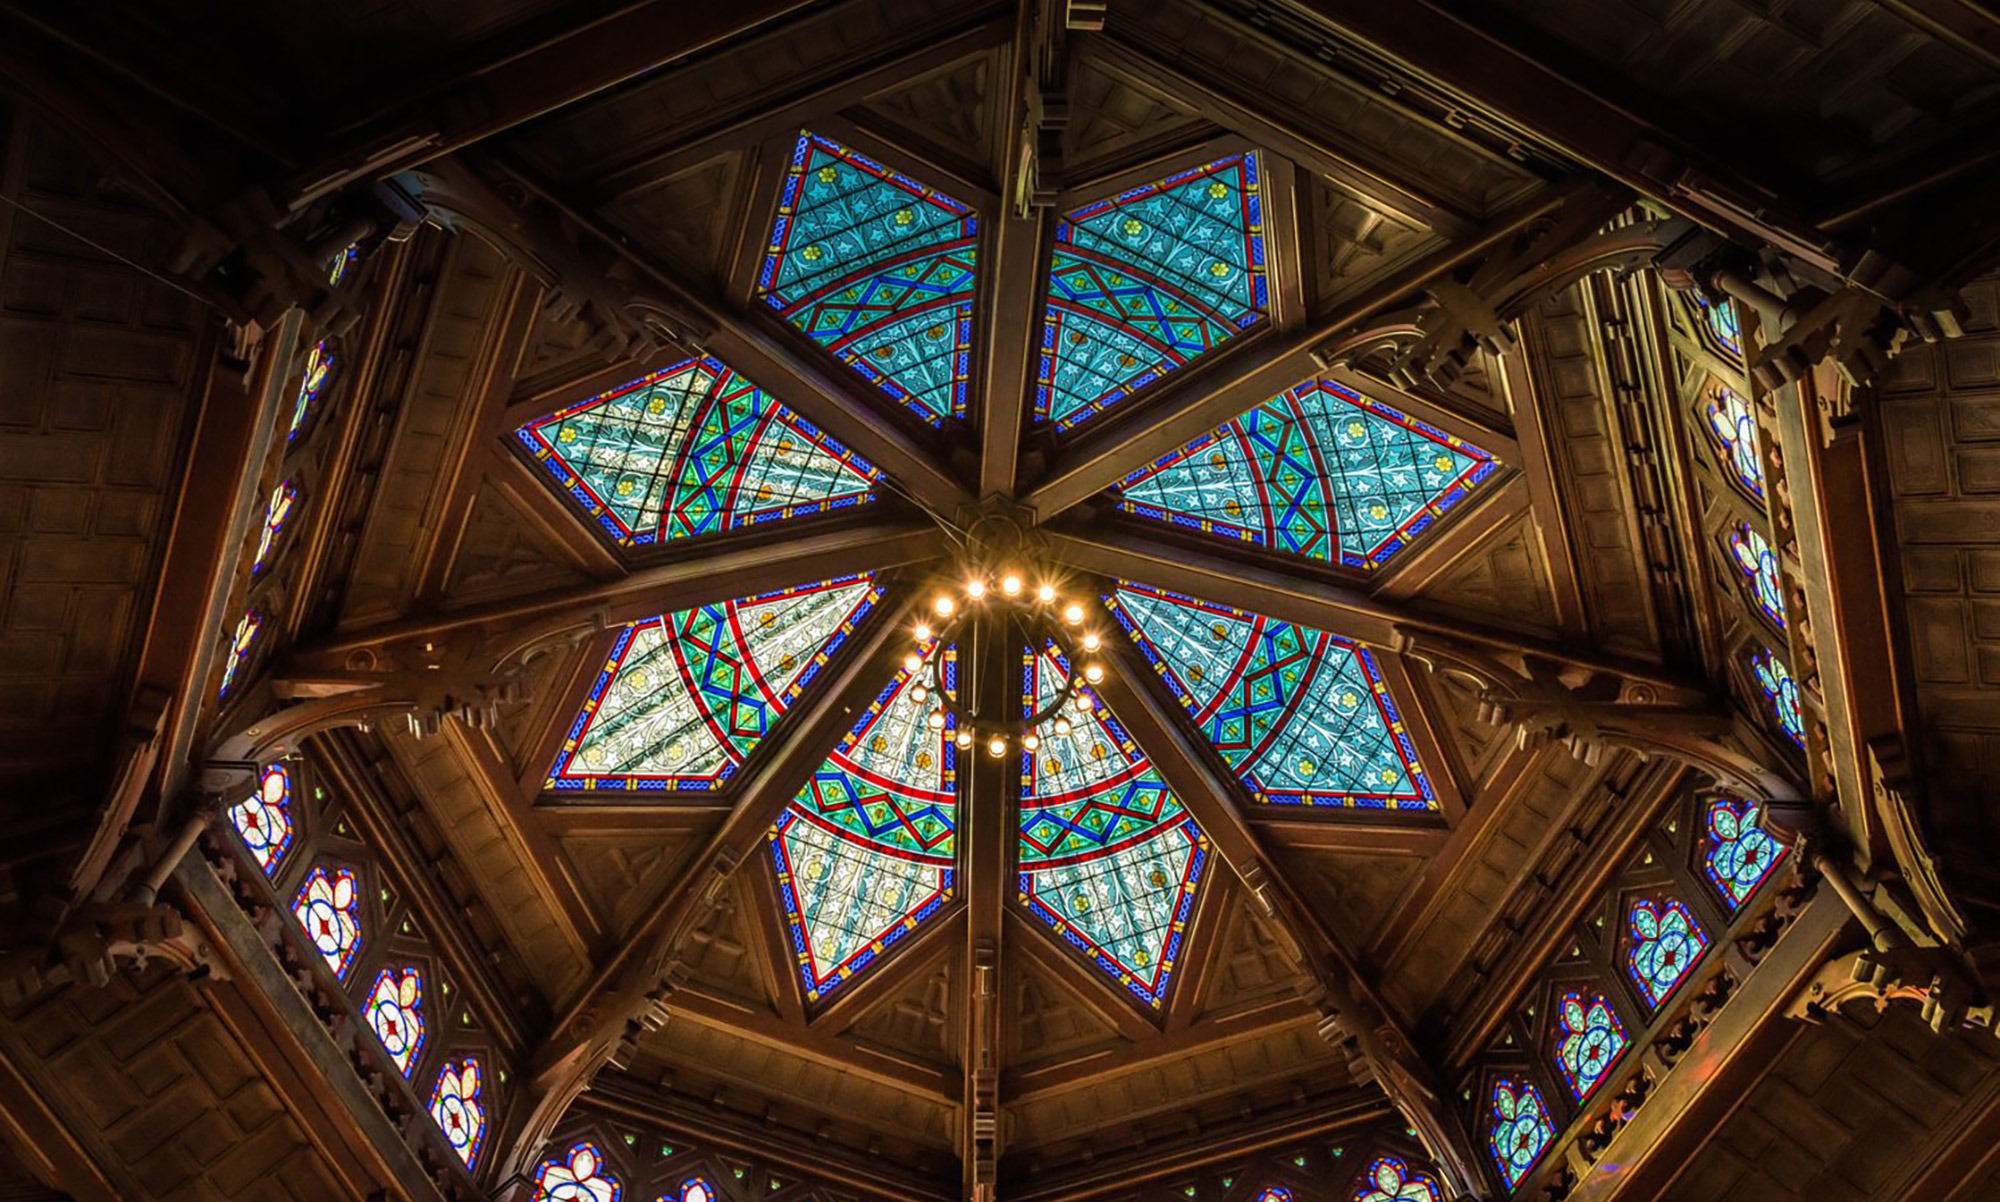 Star-shaped stained glass ceiling of chancellor green rotunda on the Princeton campus.